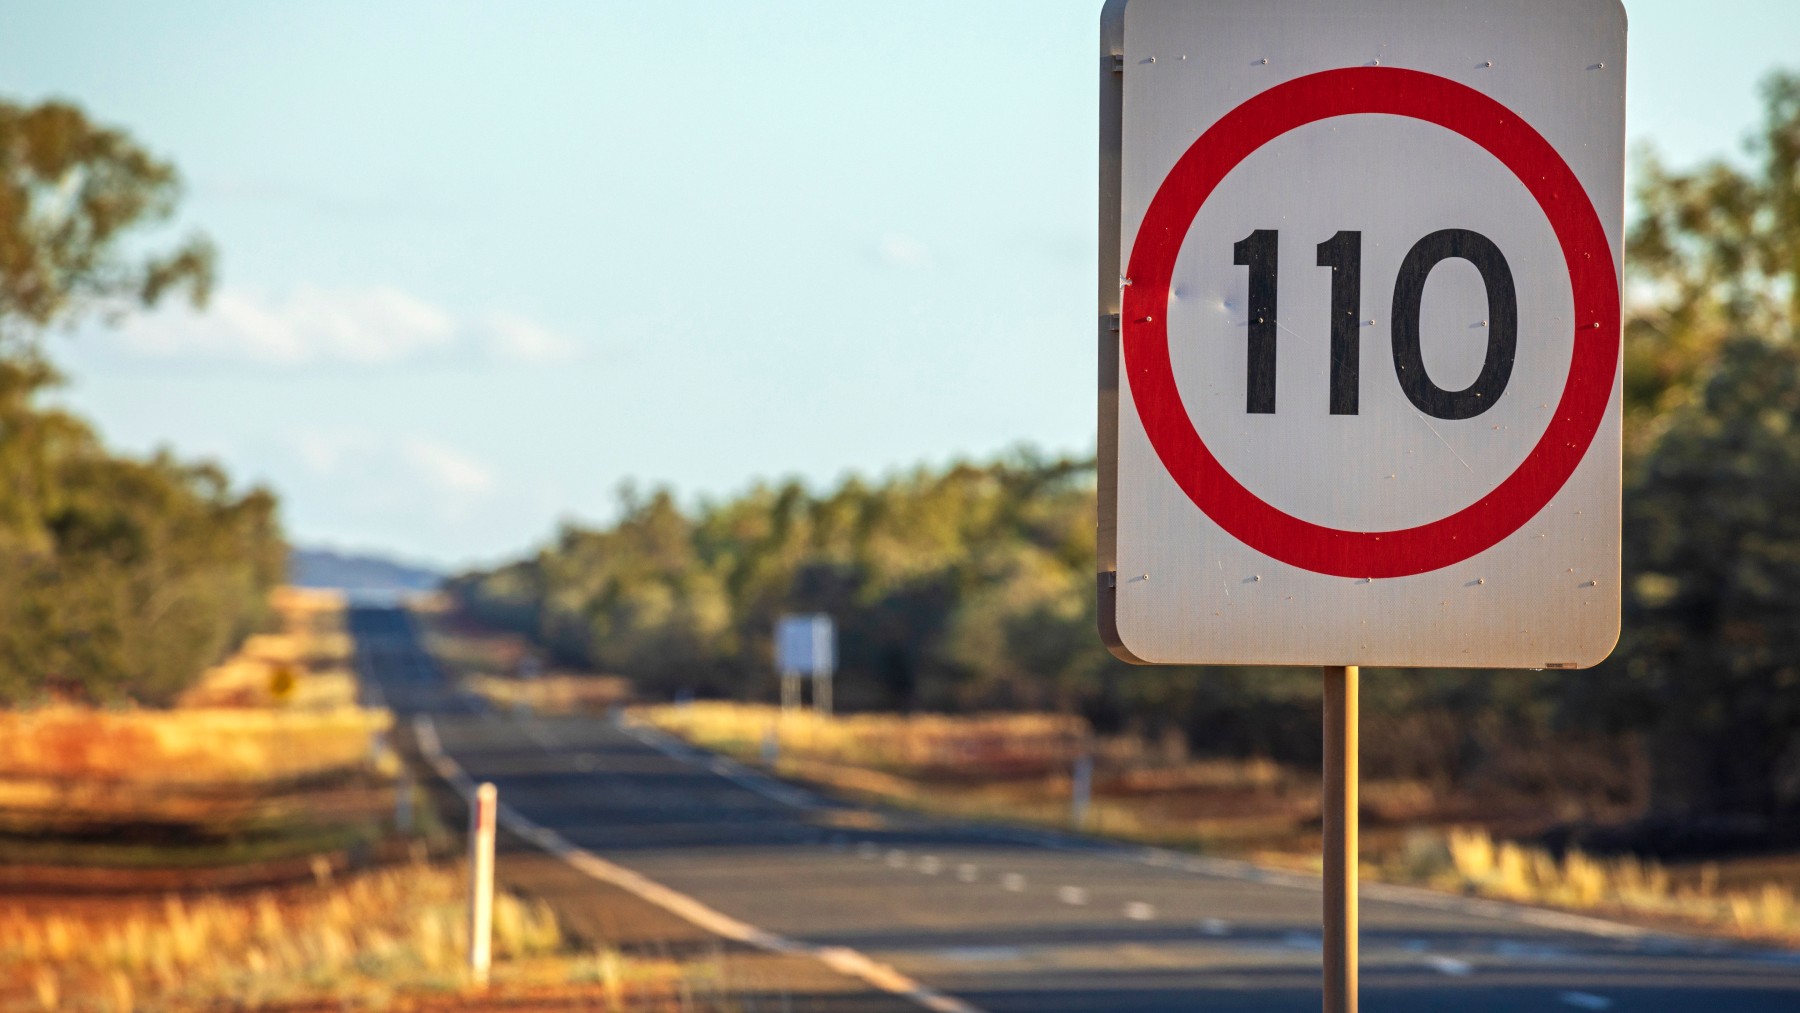 Speed limit road sign 110 kilometres per hour, empty highway in outback Australia